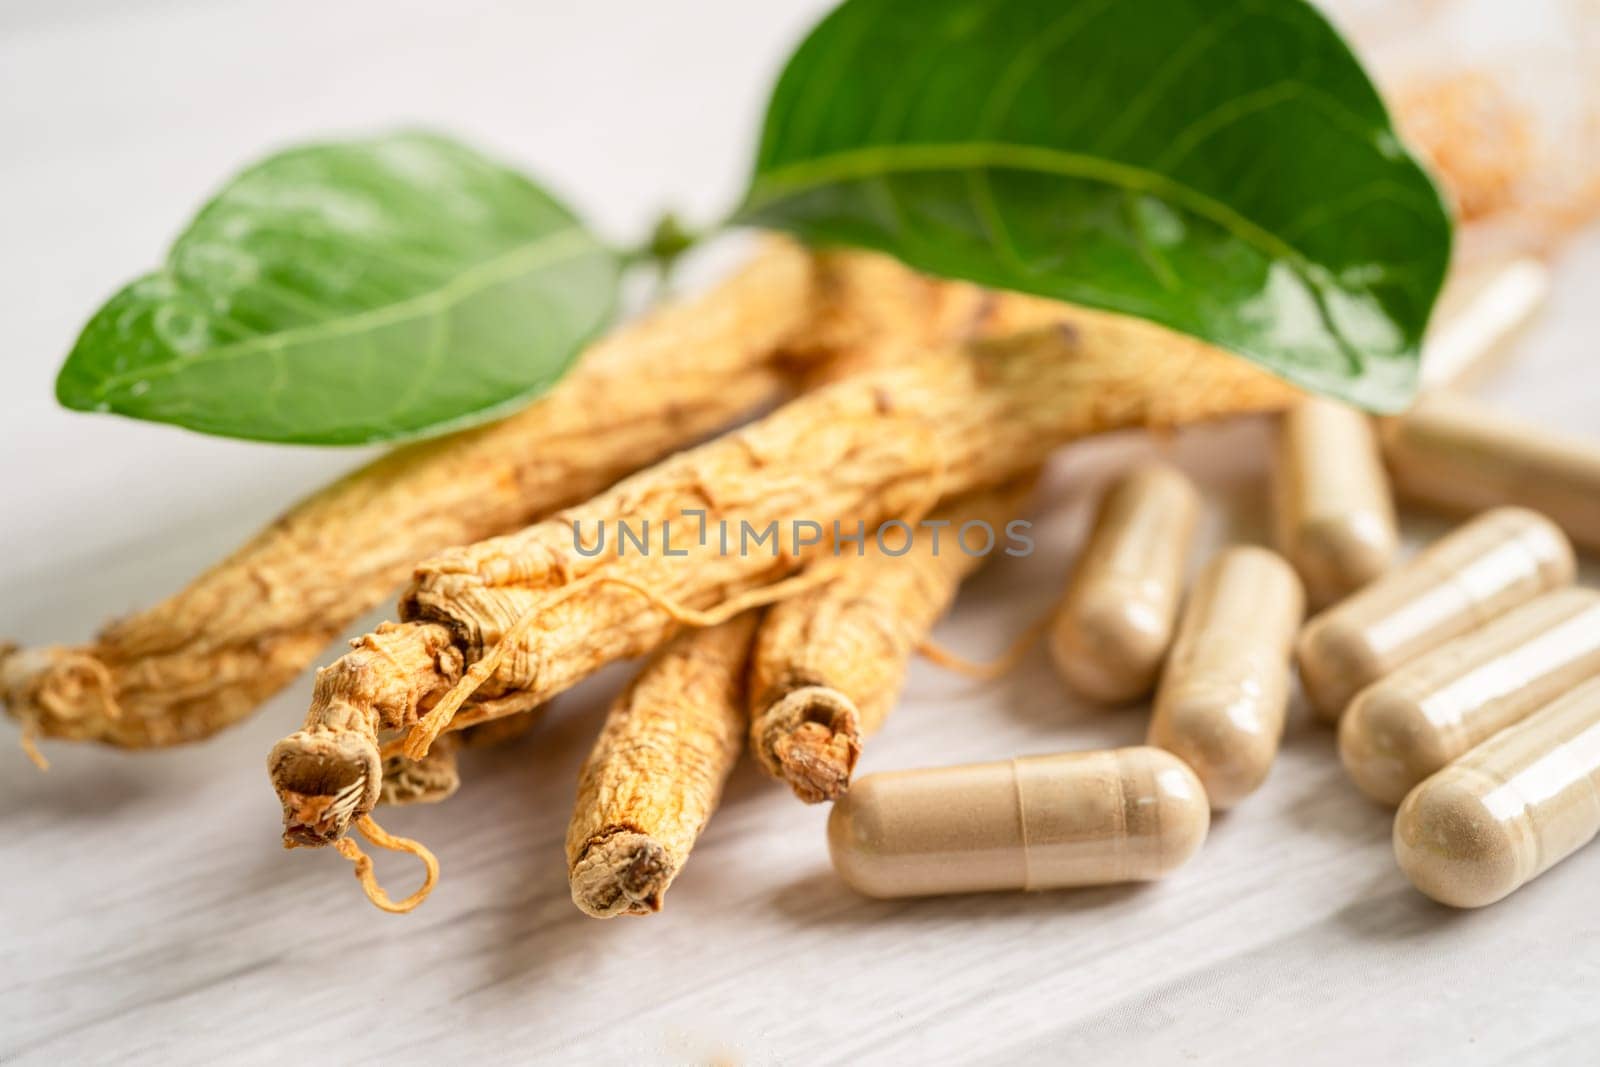 Ginseng, dried vegetable herb. Healthy food famous export food in Korea country.